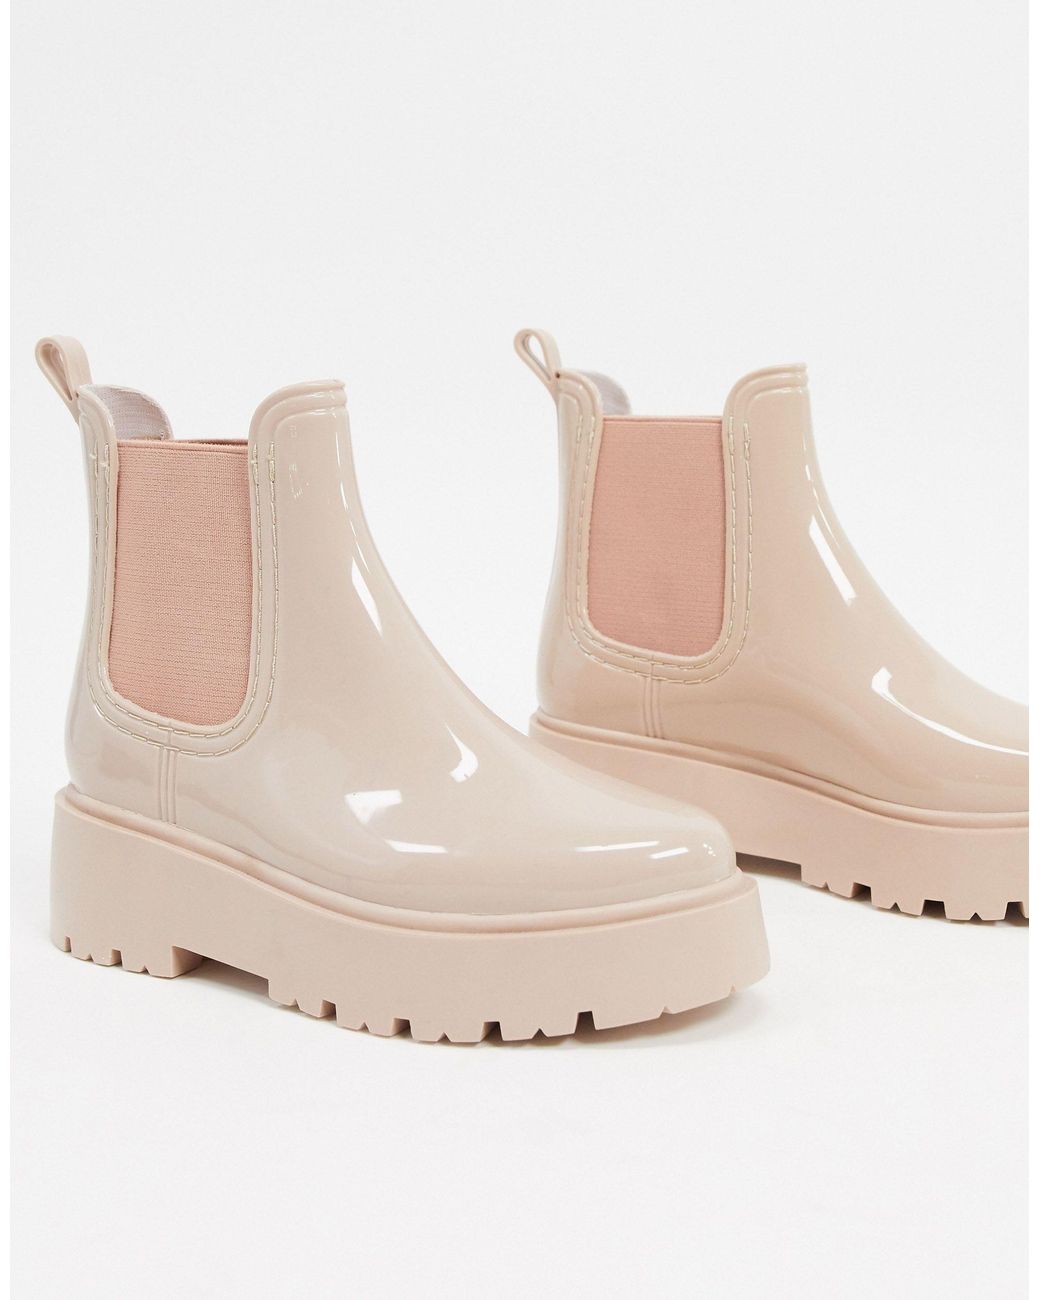 ASOS Gadget Chunky Chelsea Rain Boots in Natural | Lyst UK